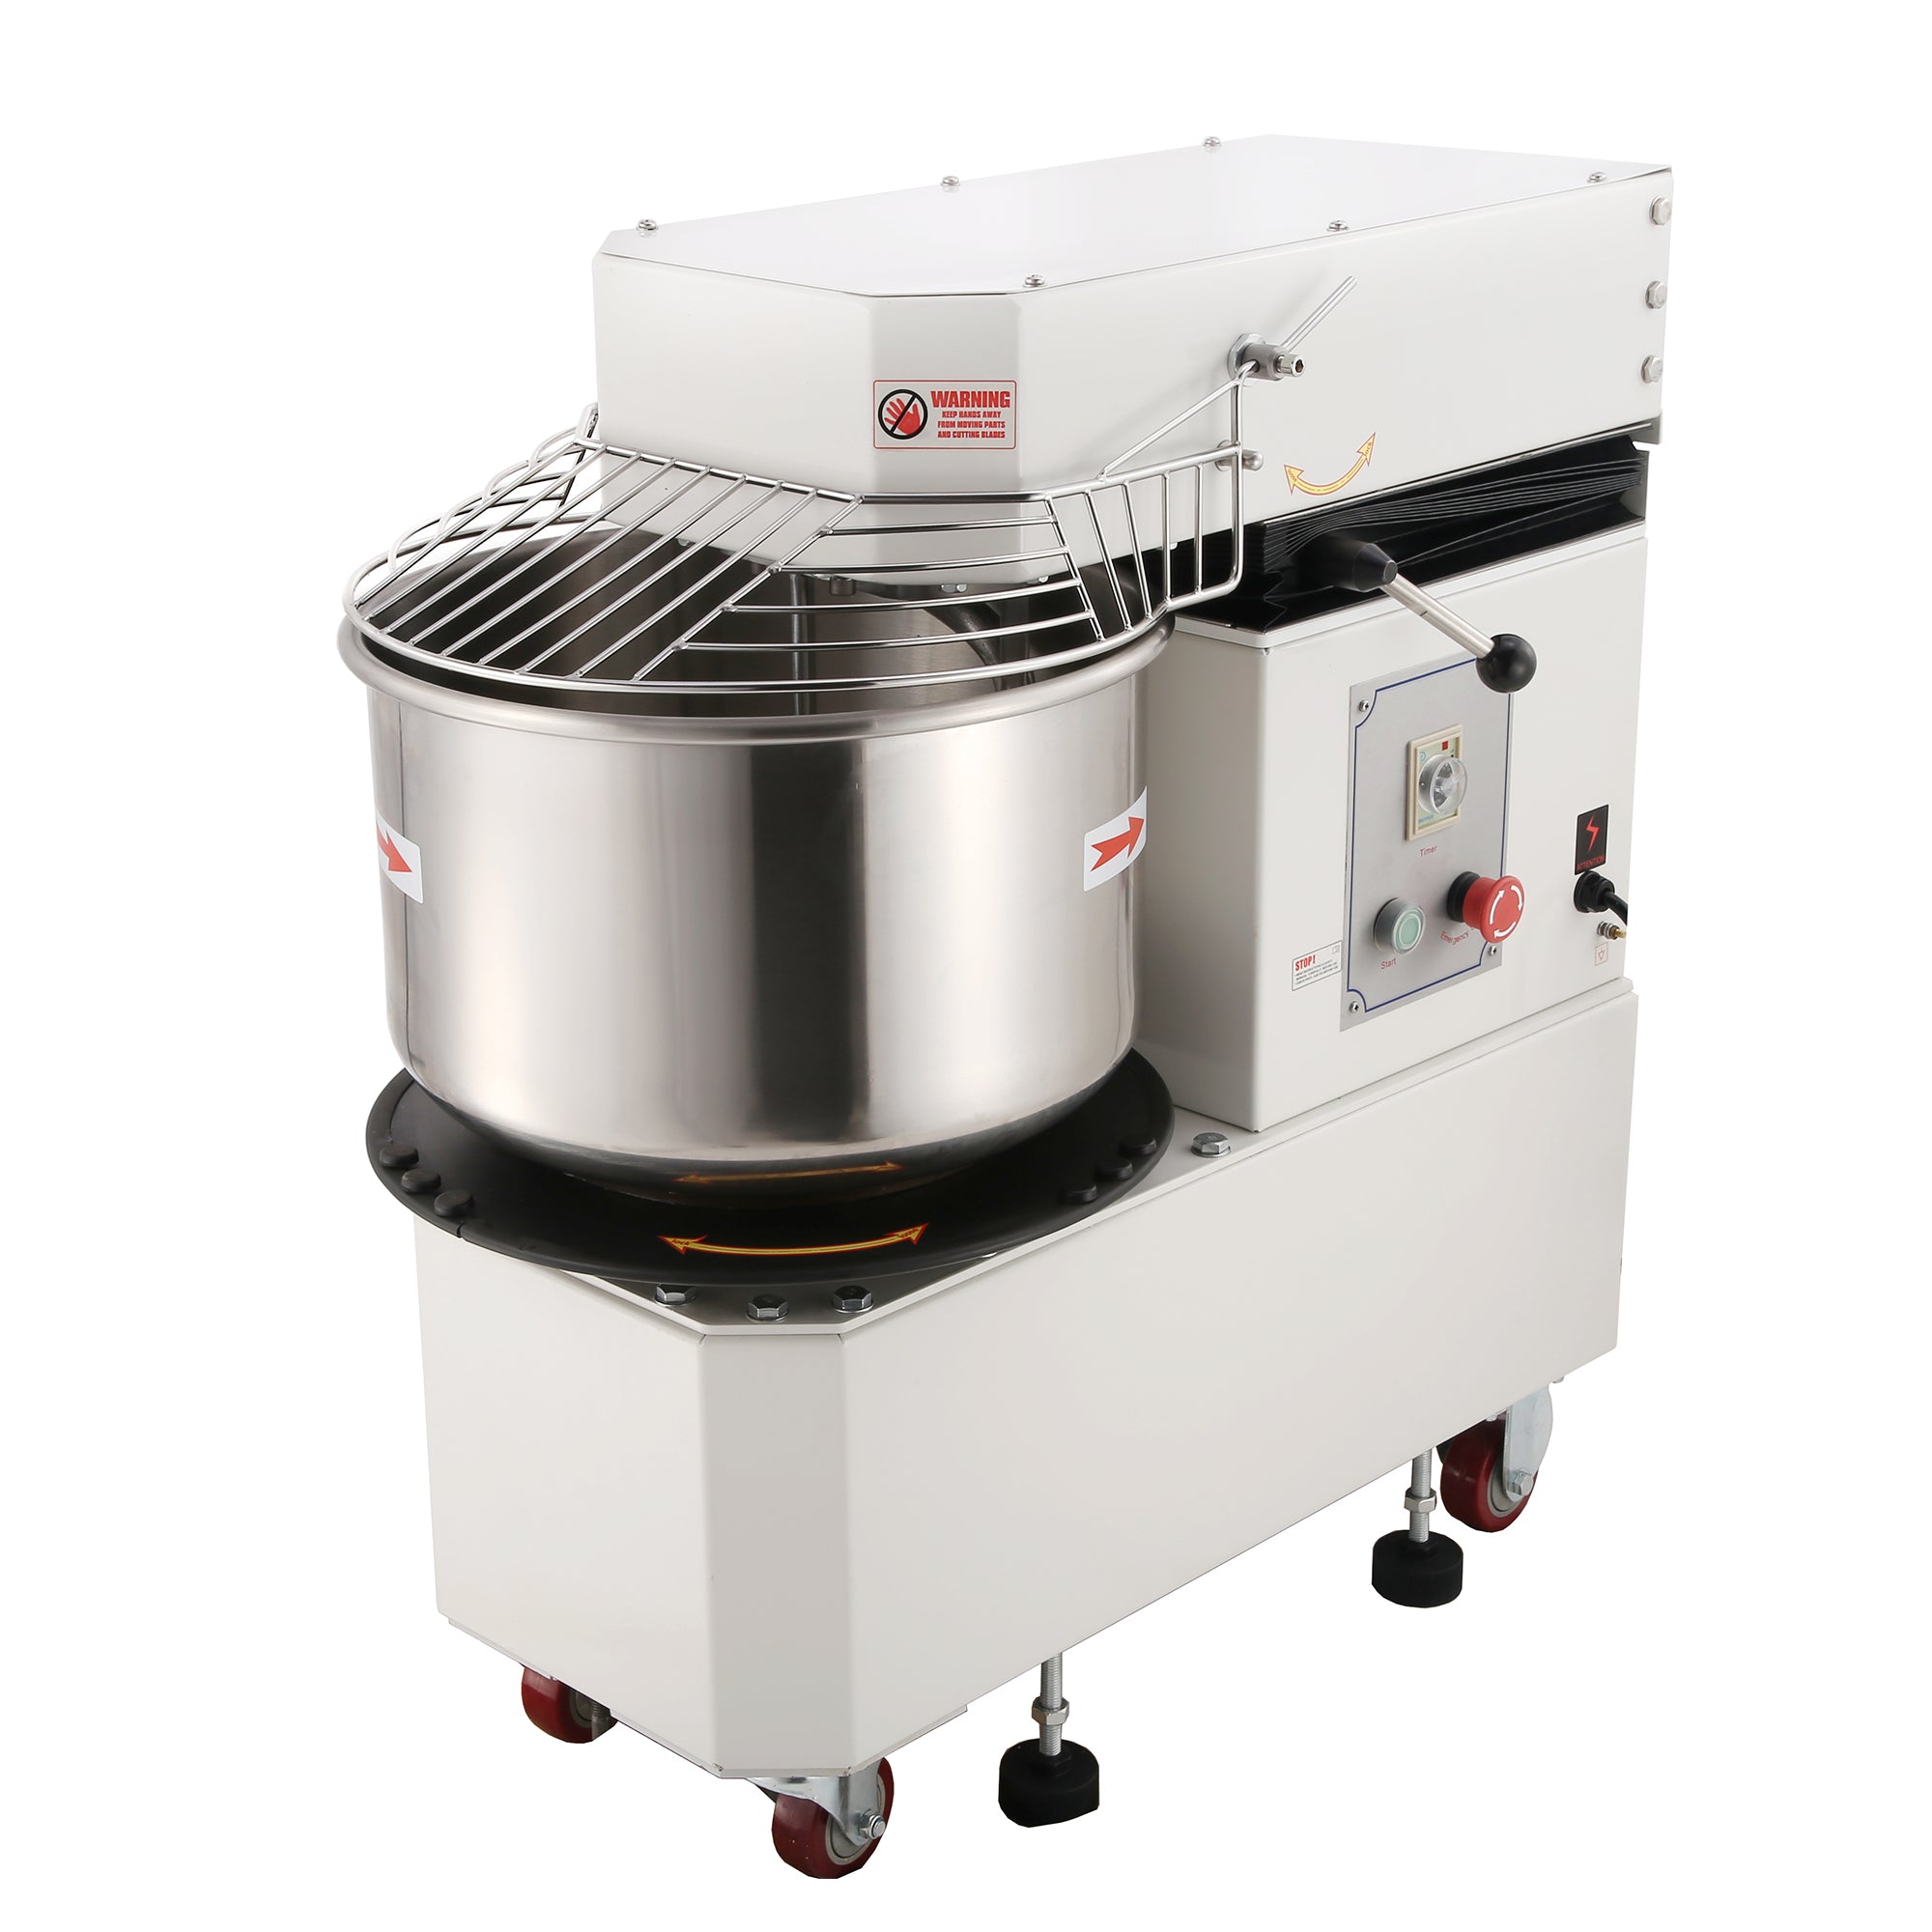 Hakka Commercial Dough Mixers 40 Quart Stainless Steel 2 Speed Rising Spiral Mixers-HTD40B (220V/60Hz,3 Phase)